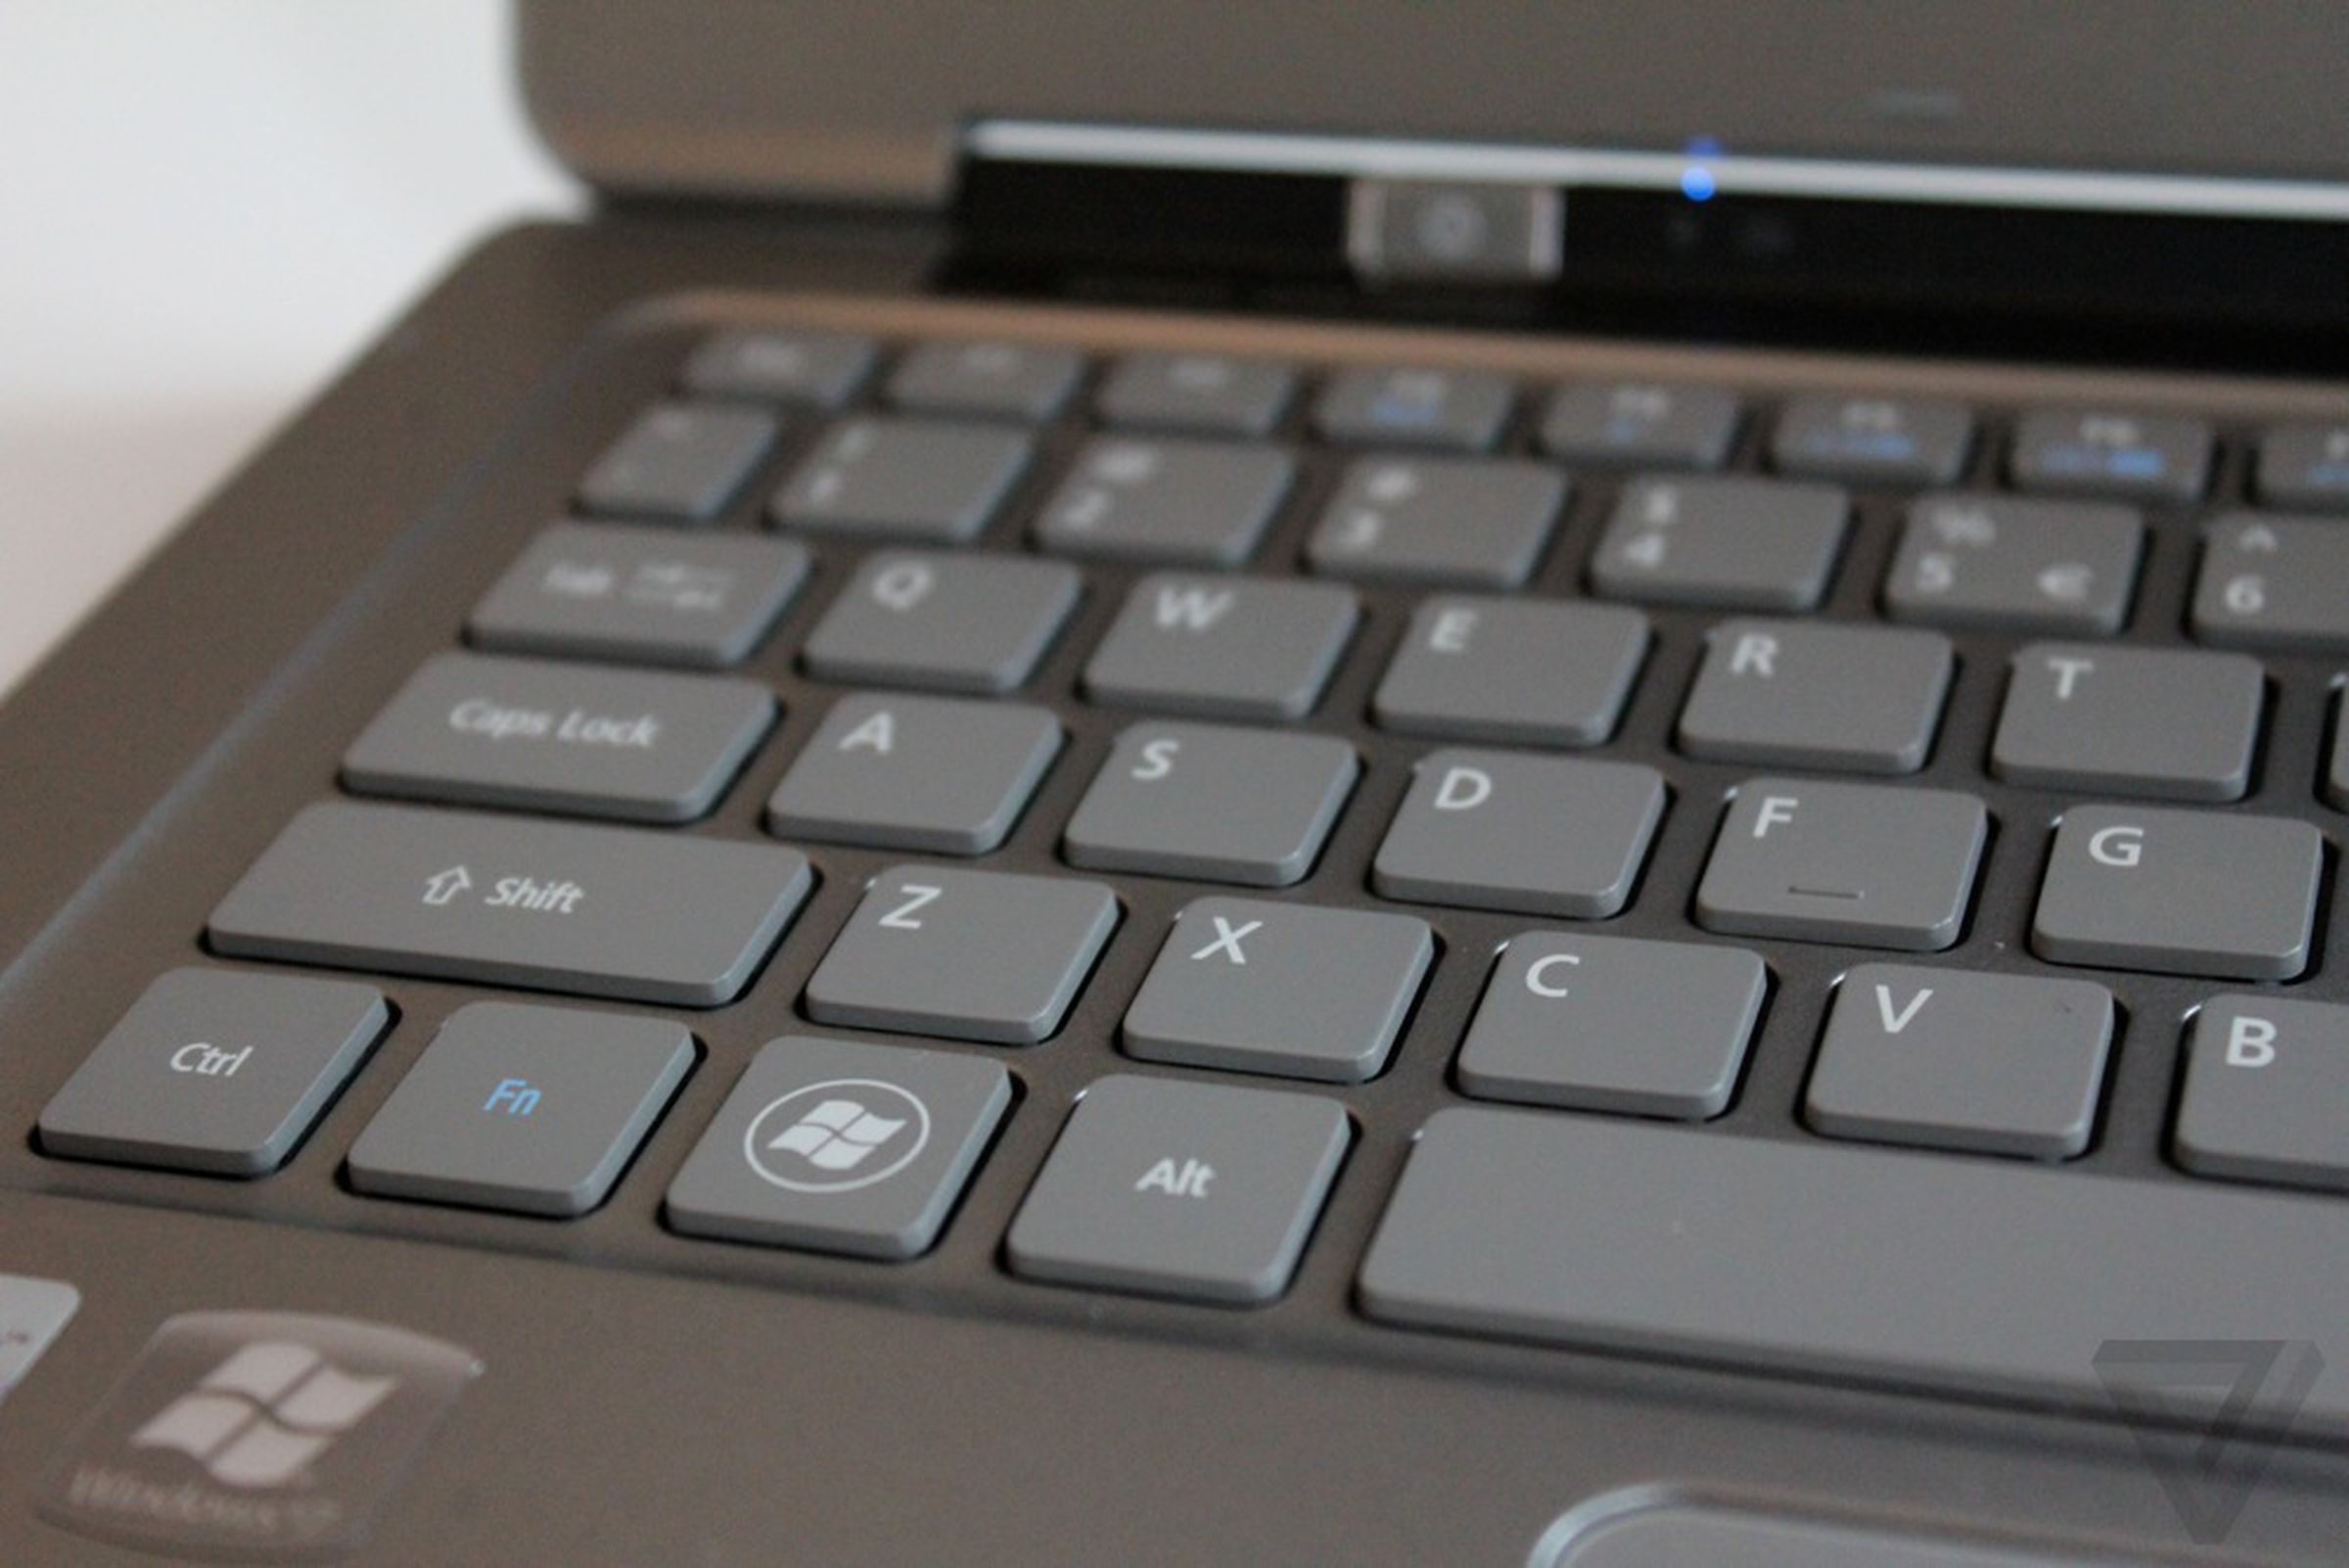 Acer Aspire S3 Ultrabook review